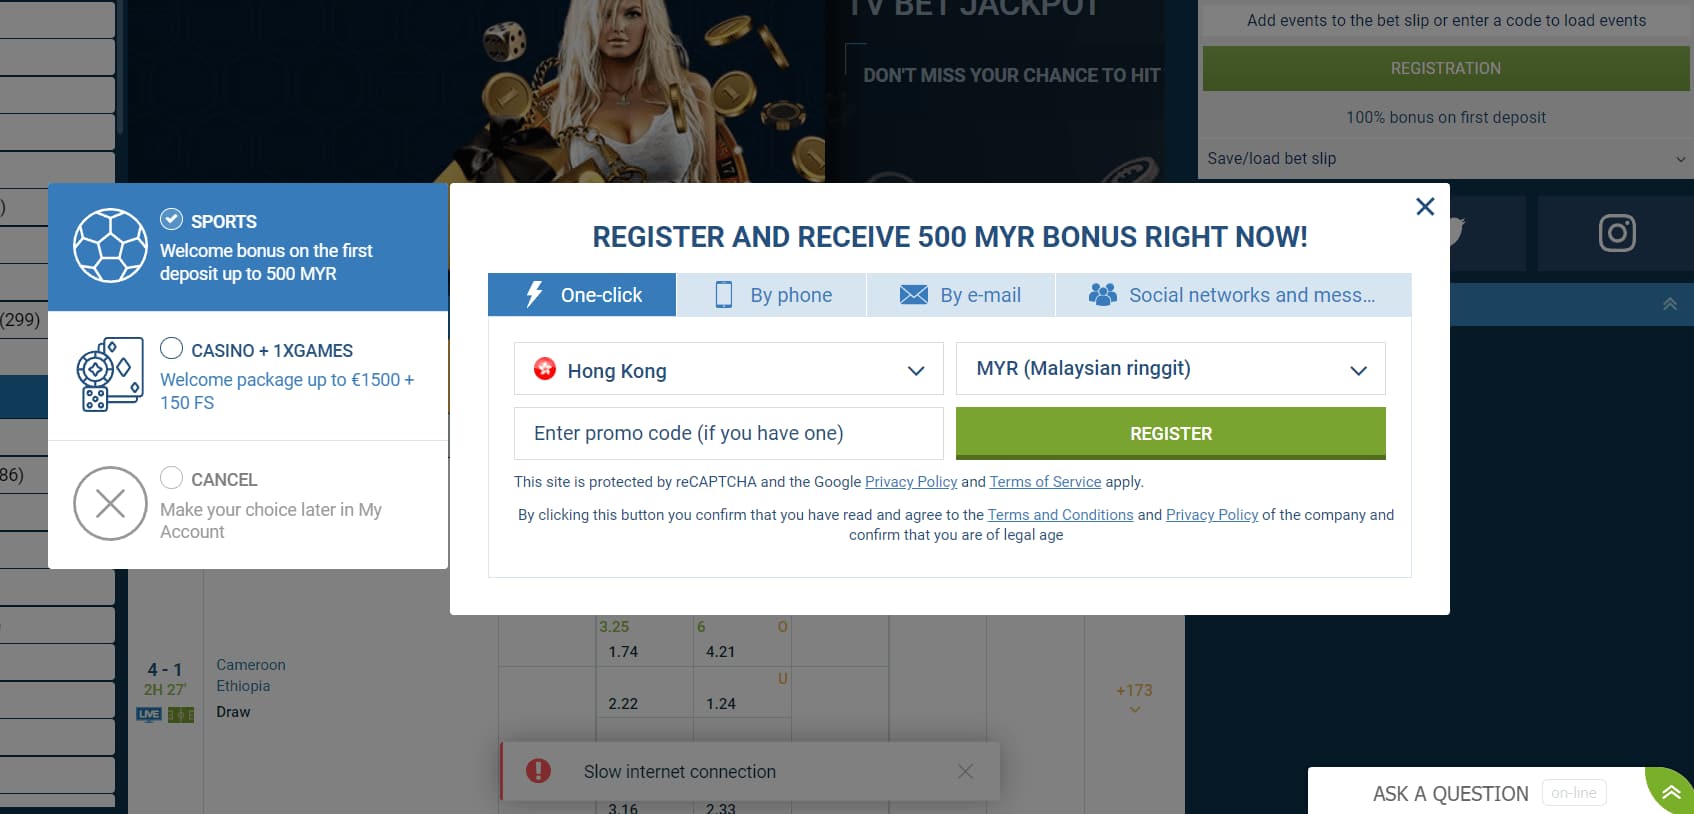 1xbet - Online Gambling Site Registration Page